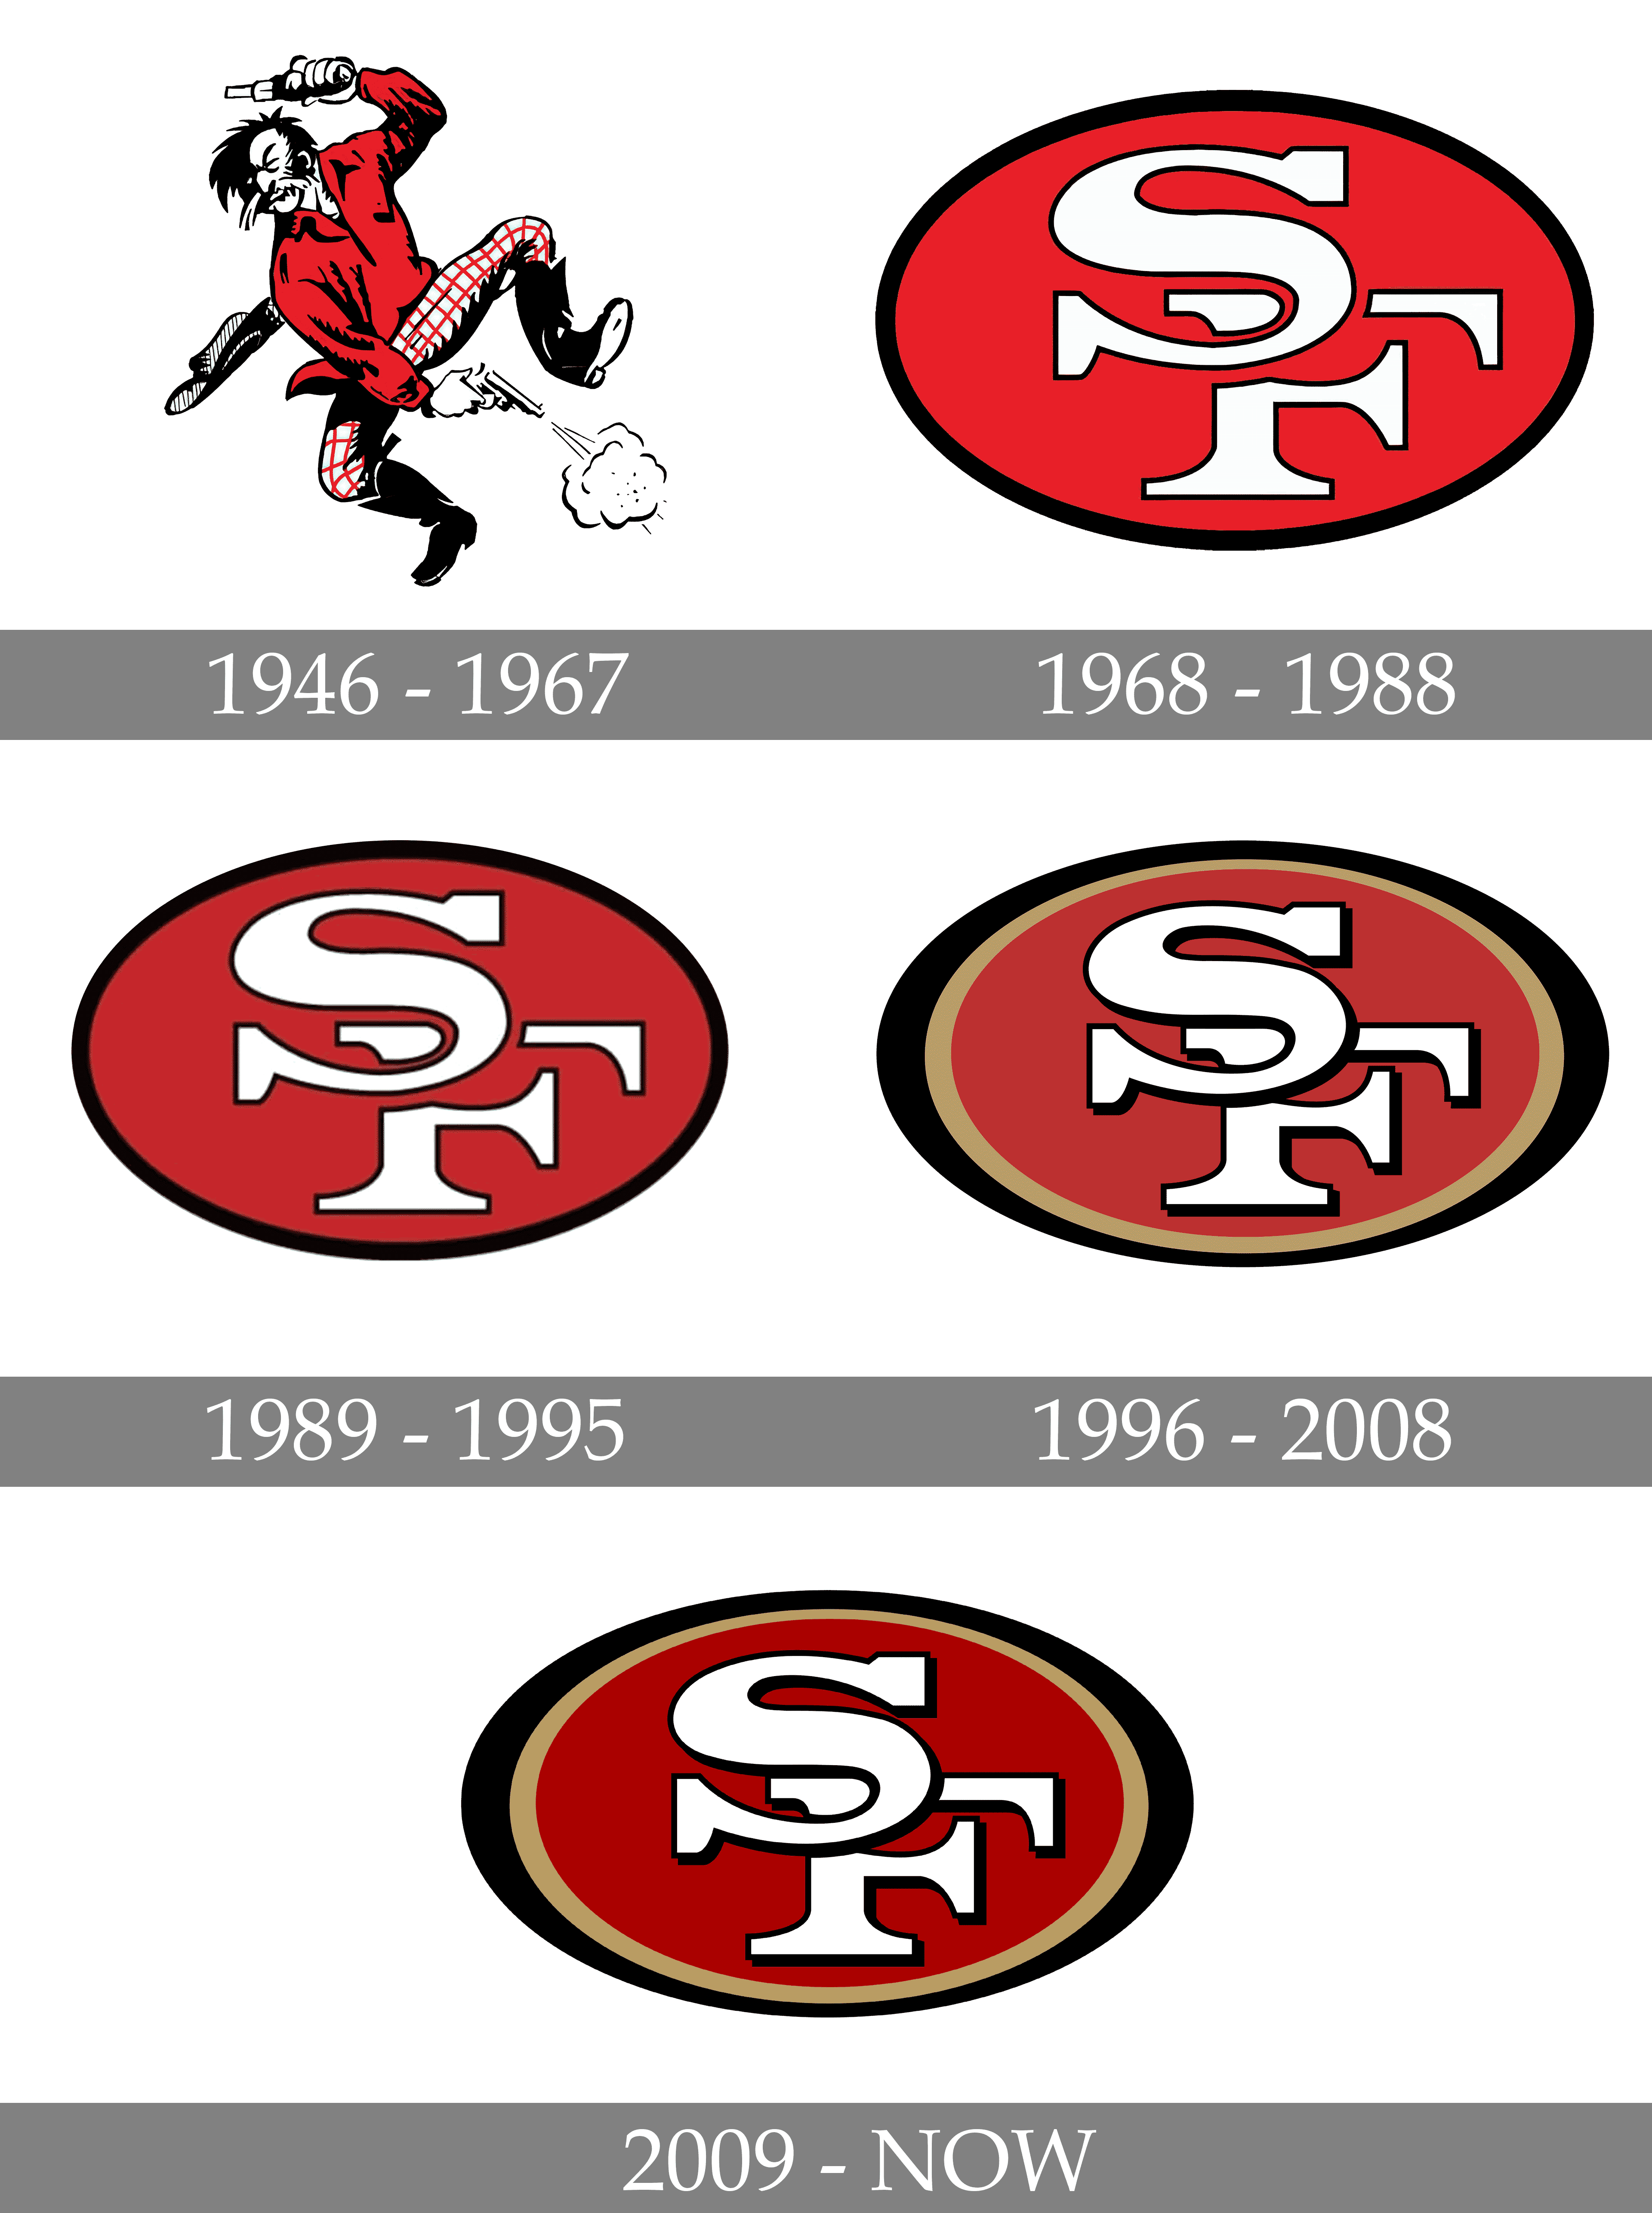 San Francisco 49ers Logo and symbol, meaning, history, PNG, brand